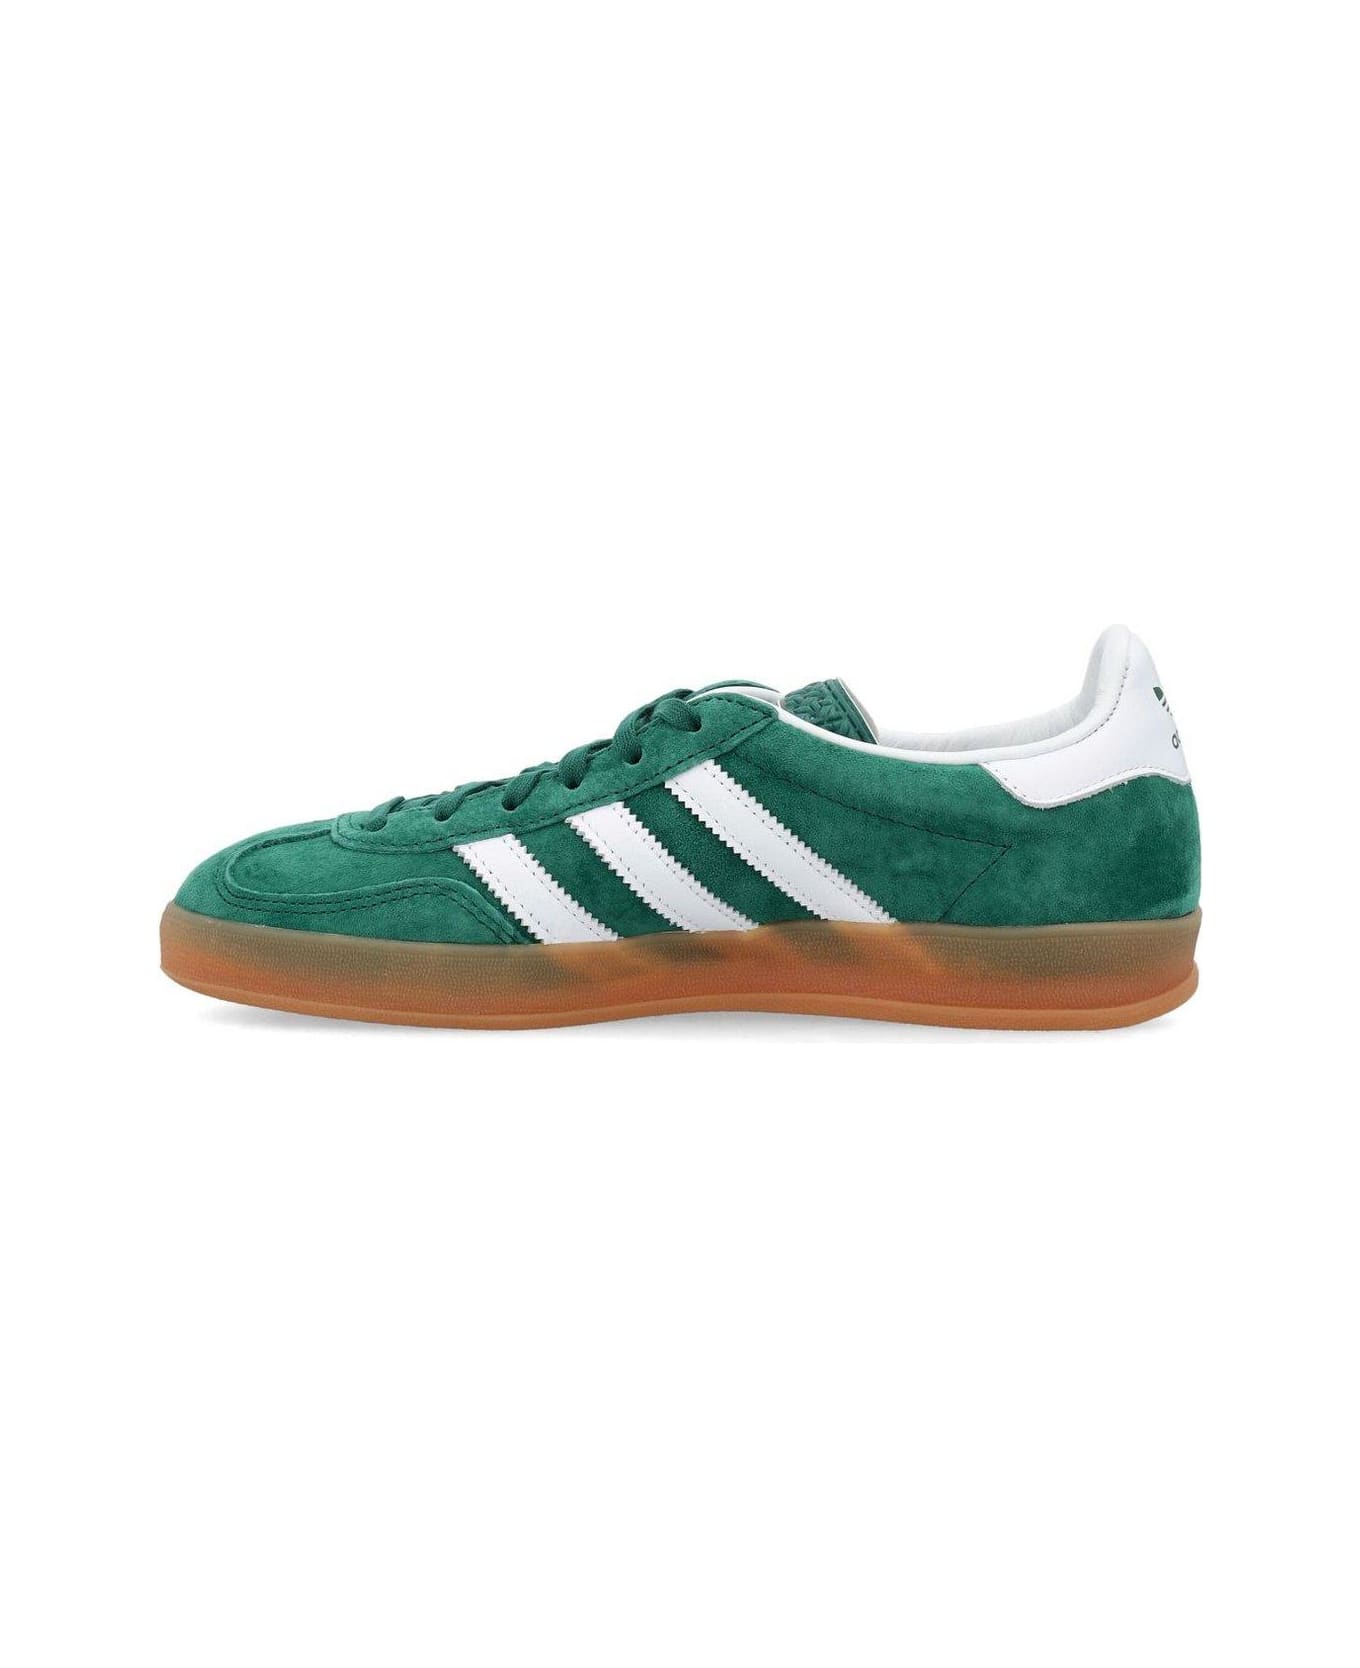 Adidas Round Toe Lace-up Sneakers - Cgreen/ftwwht/gum2